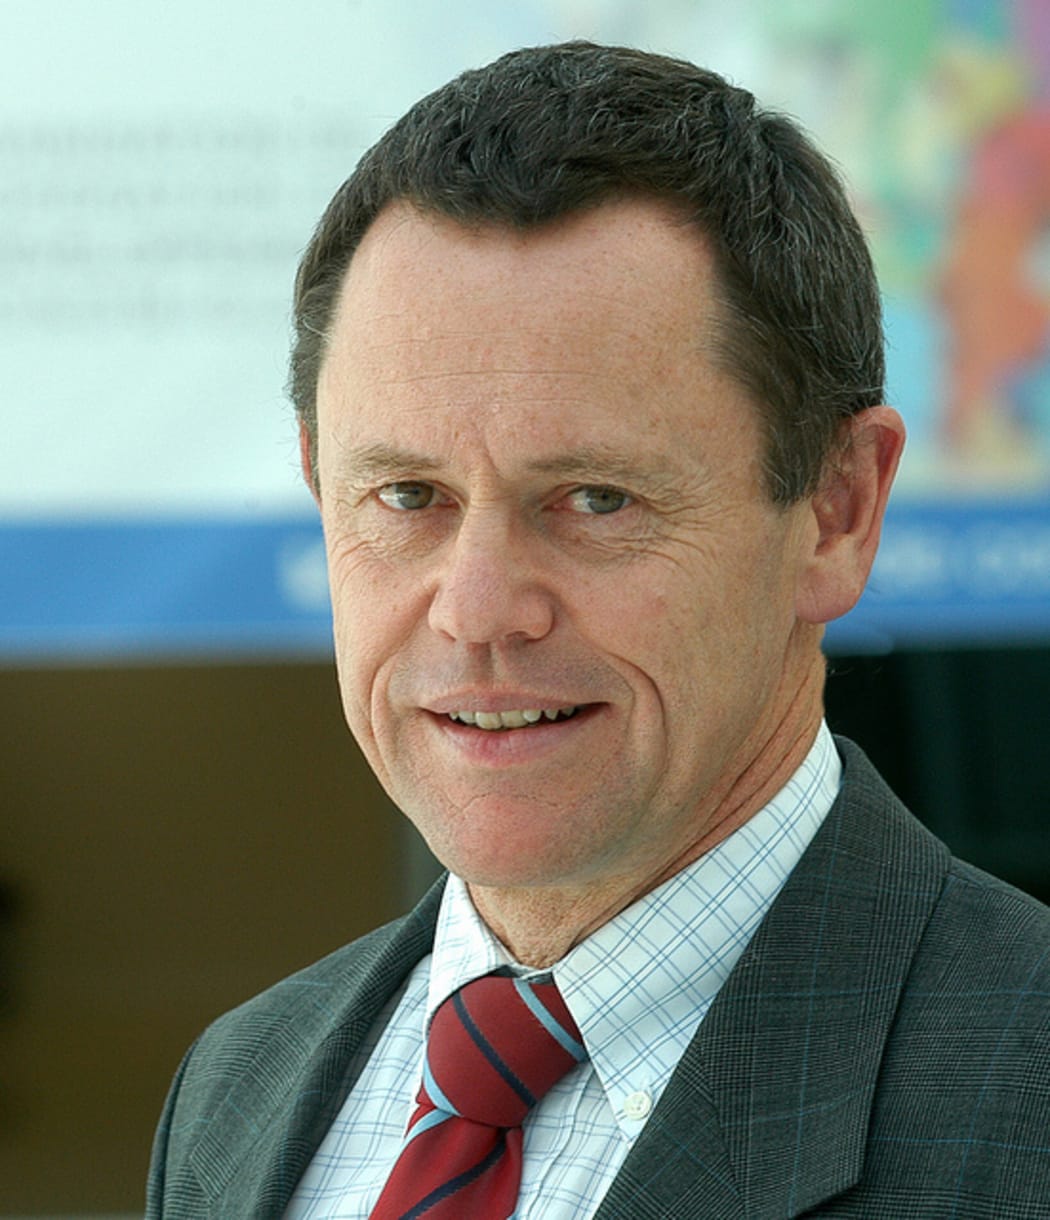 Simon Upton is currently the head of the OECD's environment division.